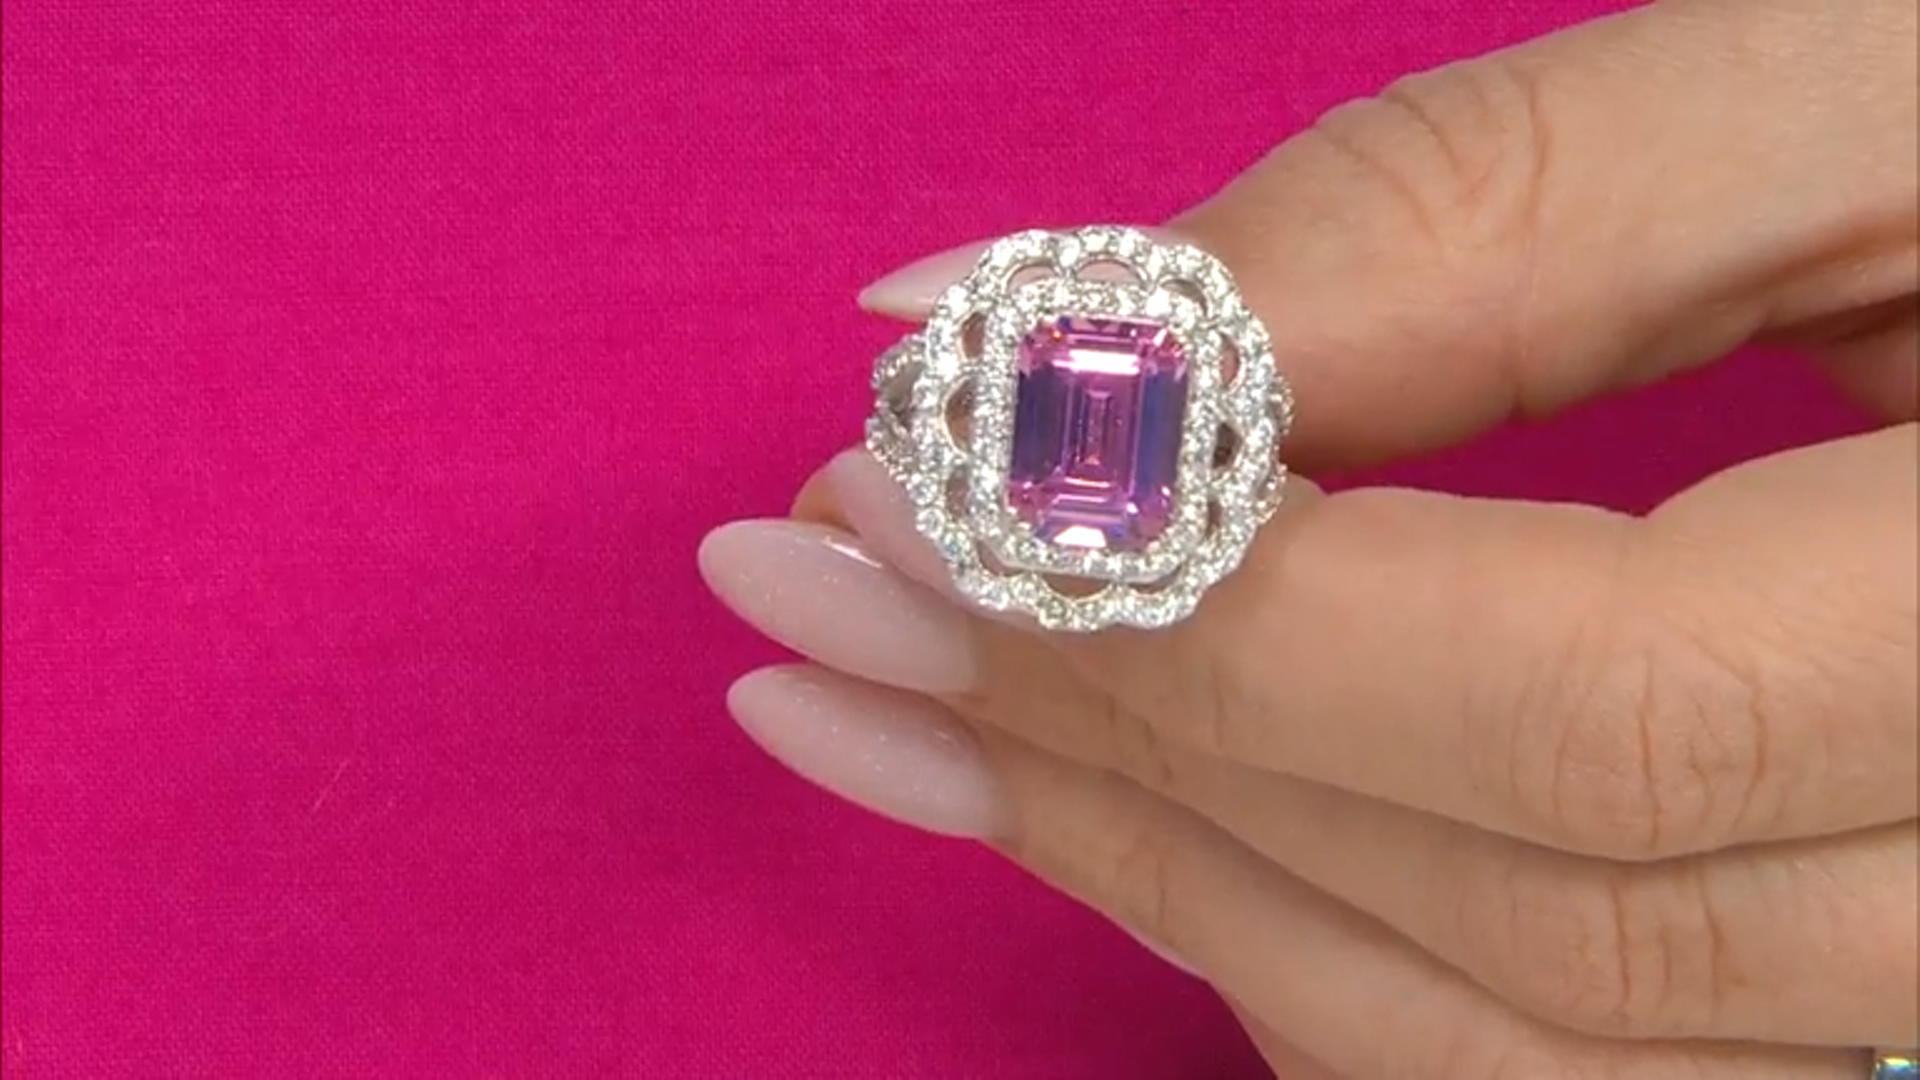 Pink and White Cubic Zirconia Rhodium Over Silver Ring (7.15ctw DEW) Video Thumbnail